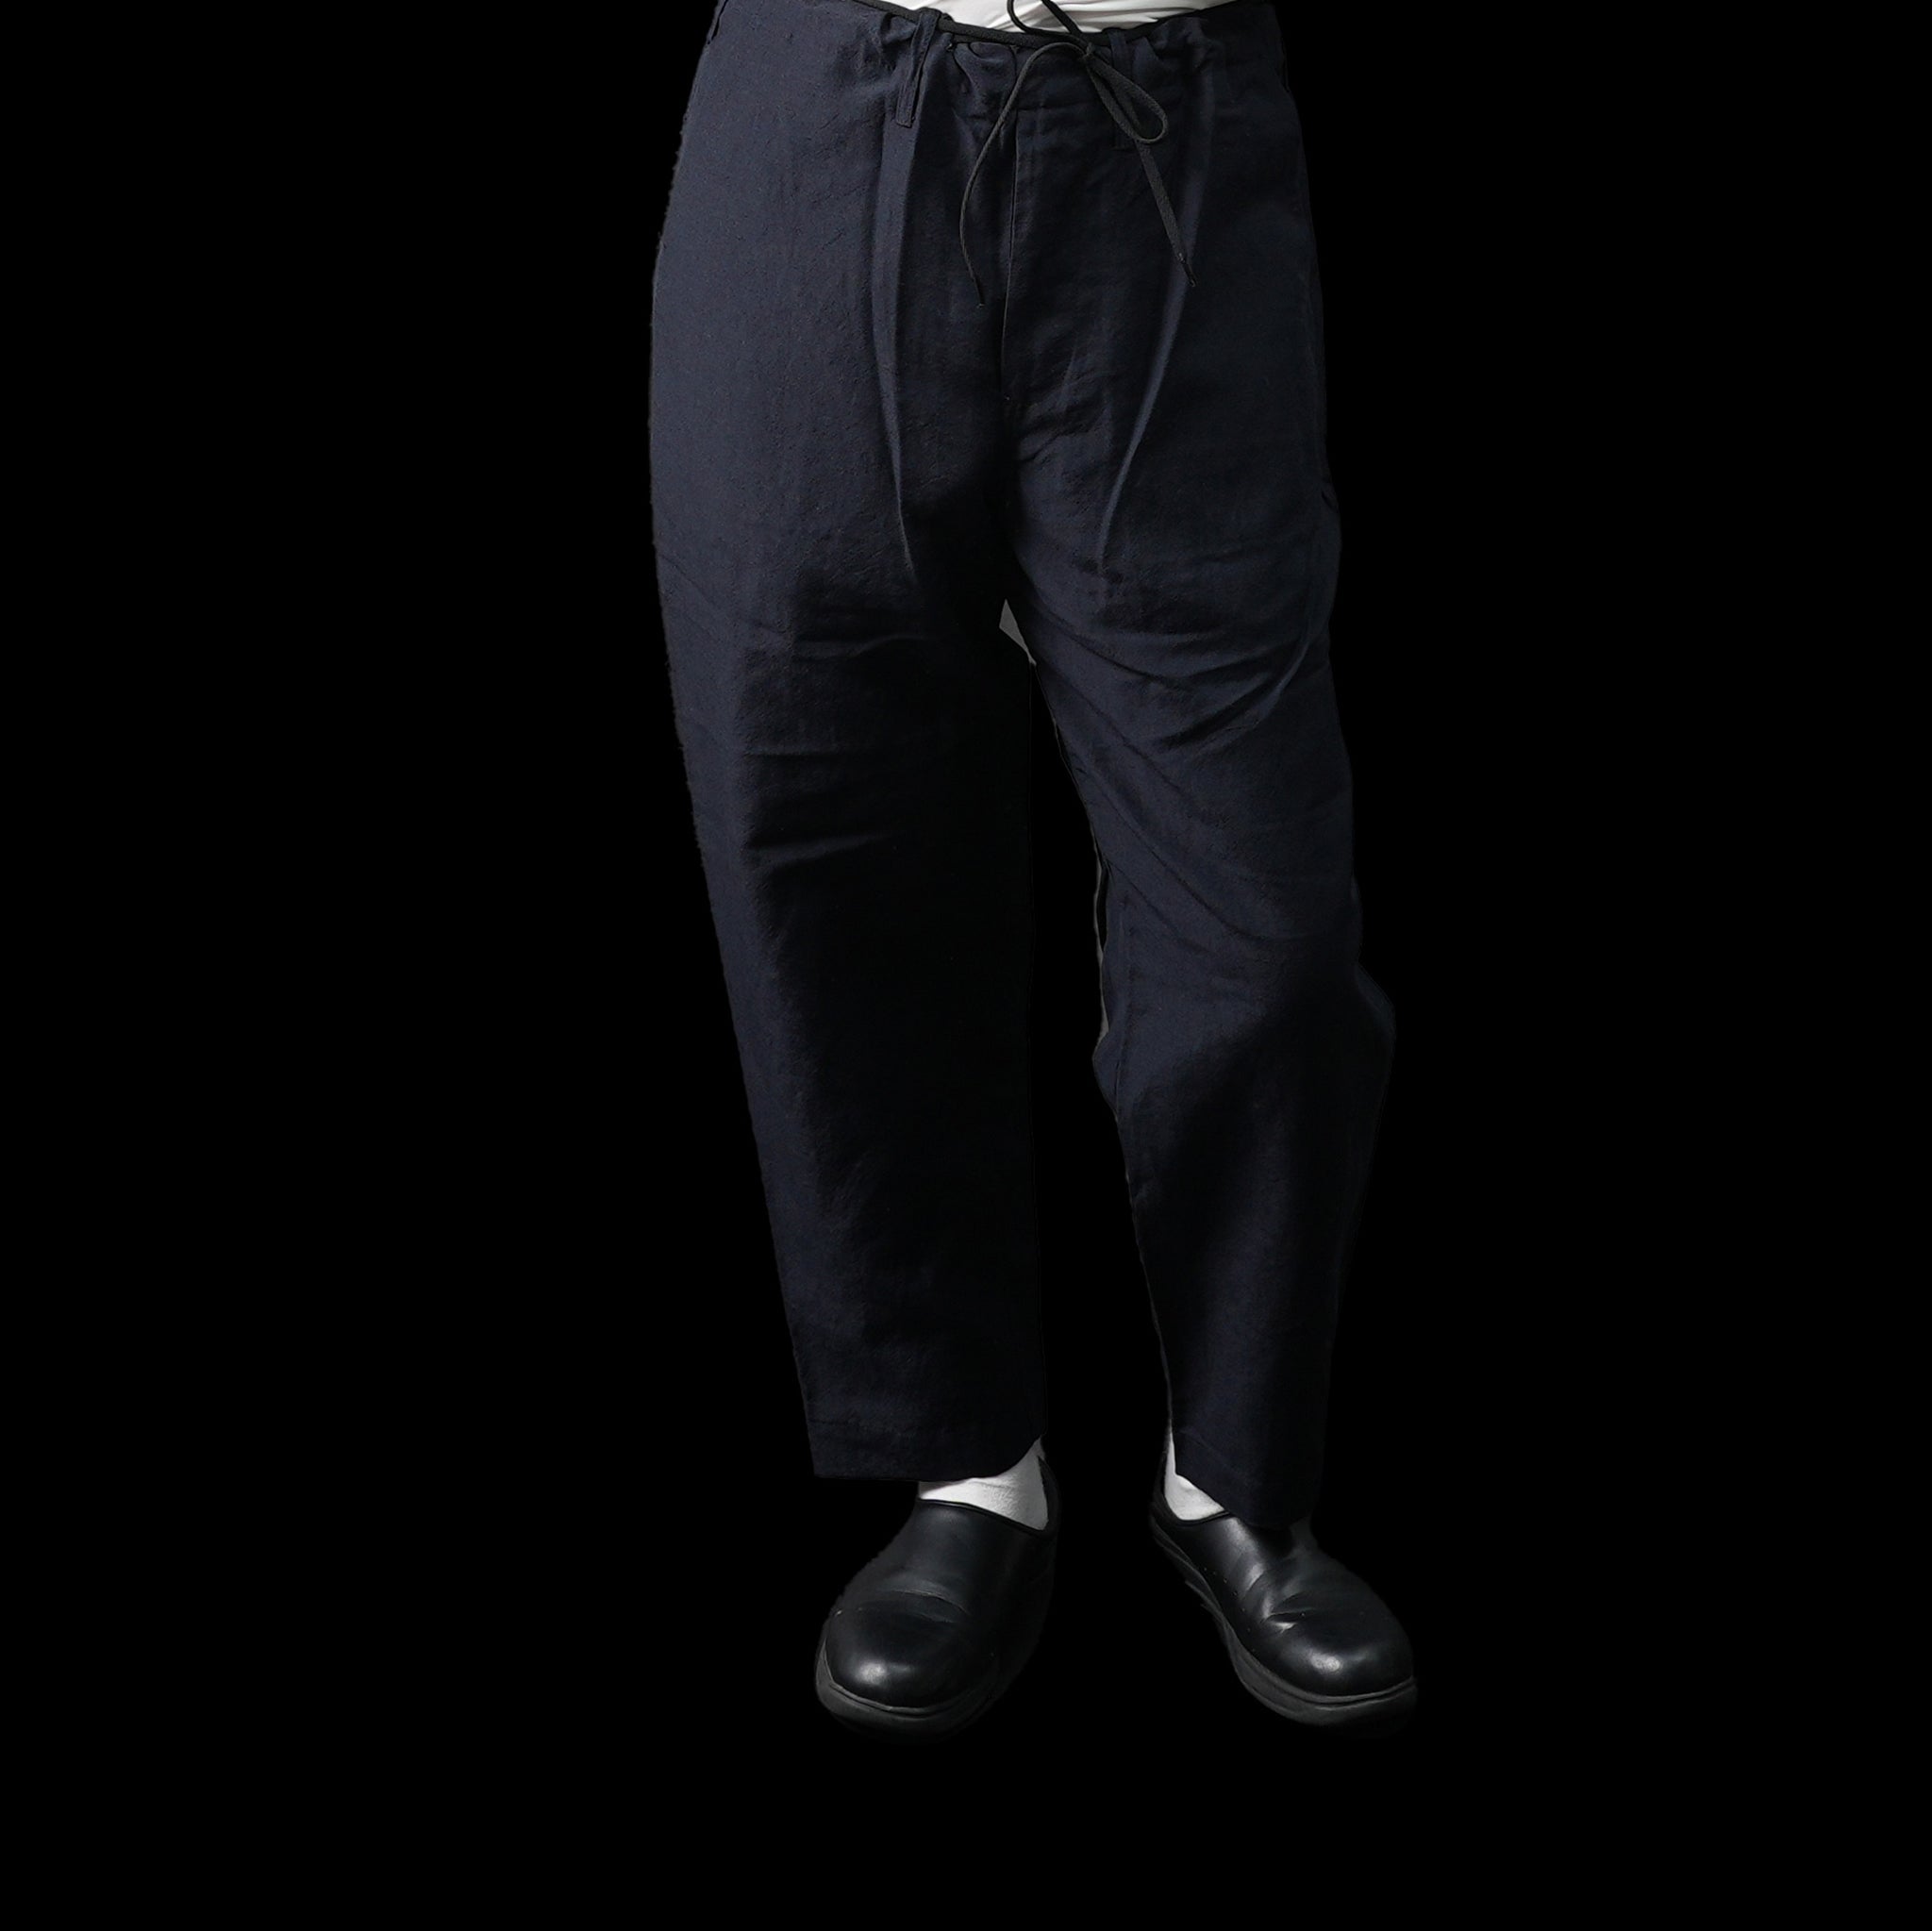 Name: Non-Elastic E-Z Pants Dead Stock Fabric Collection | Color:Navy | Size: One Fits All 【CITYLIGHTS PRODUCTS_シティライツプロダクツ】